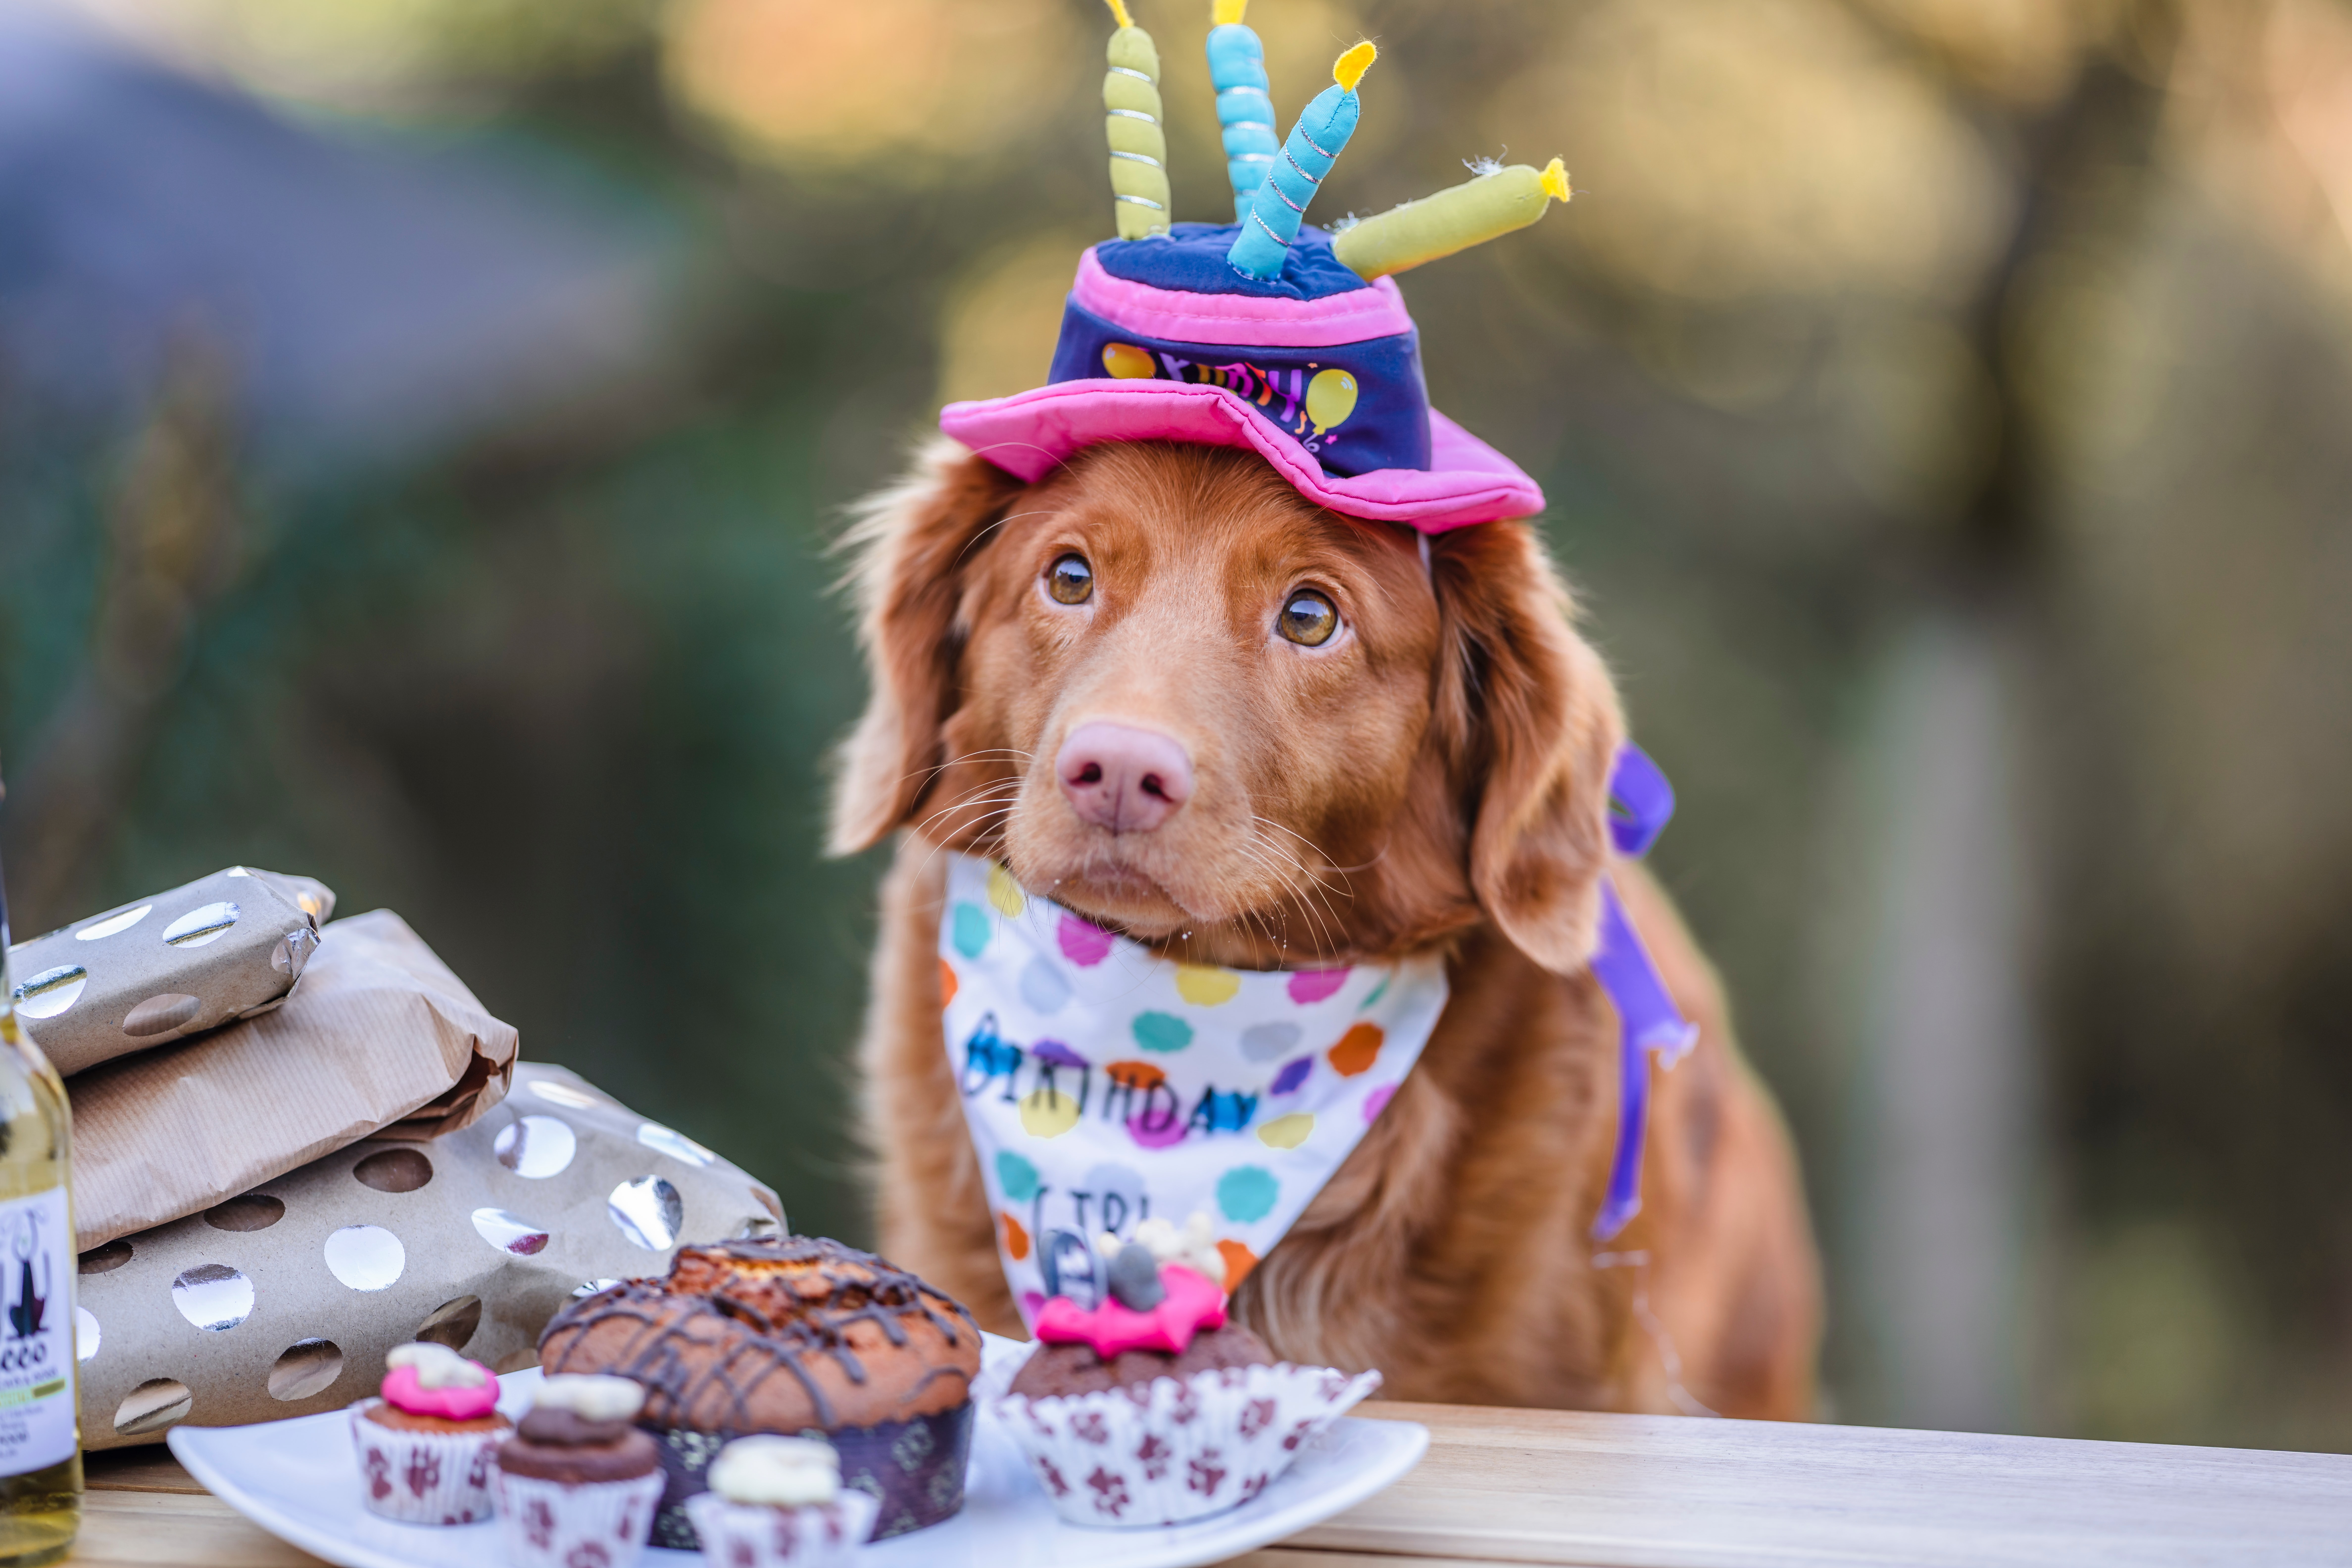 What Should I Make for My Dog’s Birthday?